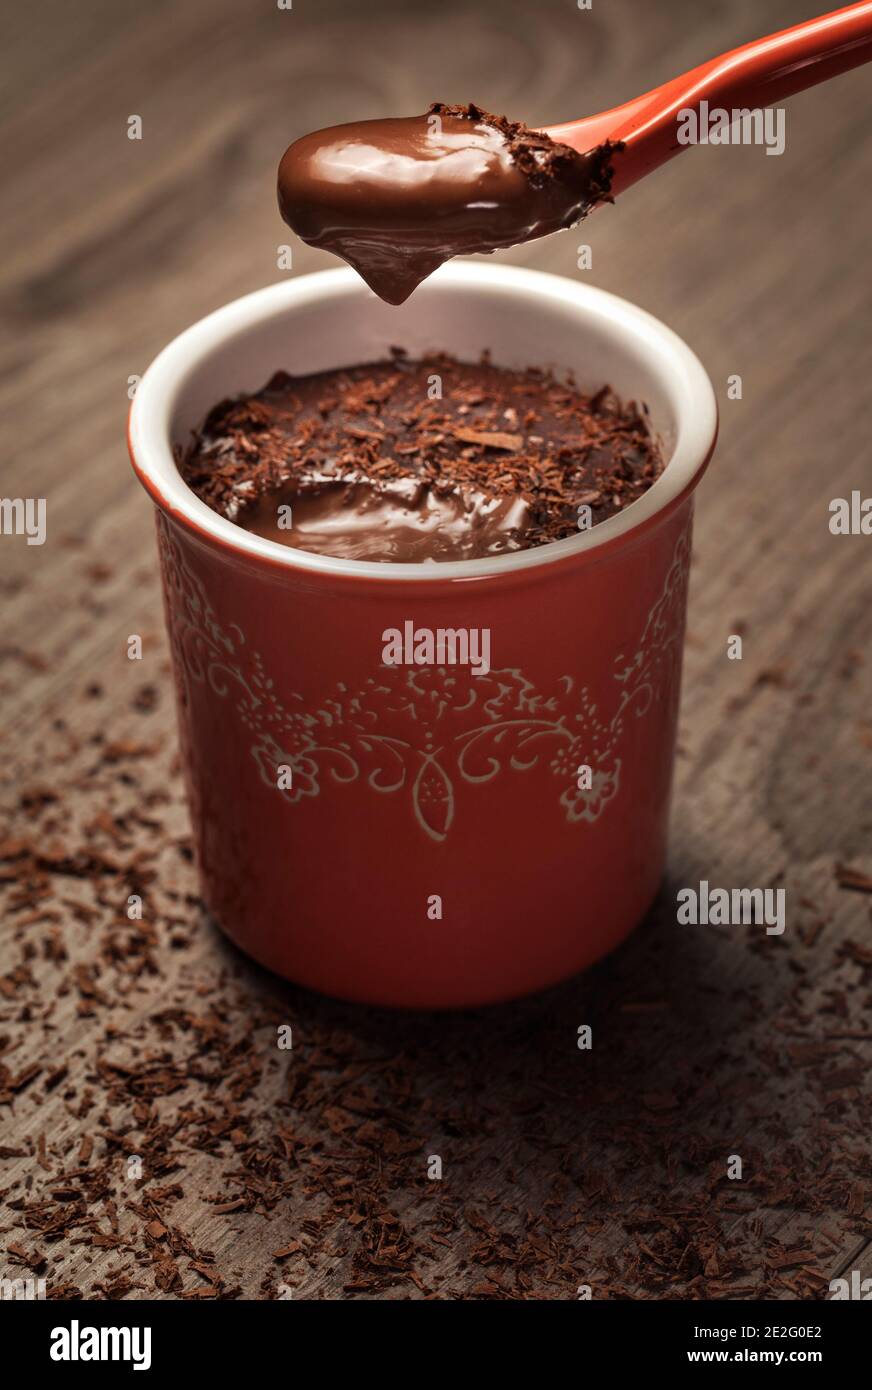 chocolate pudding in a red pot with cream on a spoon and chocolate chips on the grey table Stock Photo